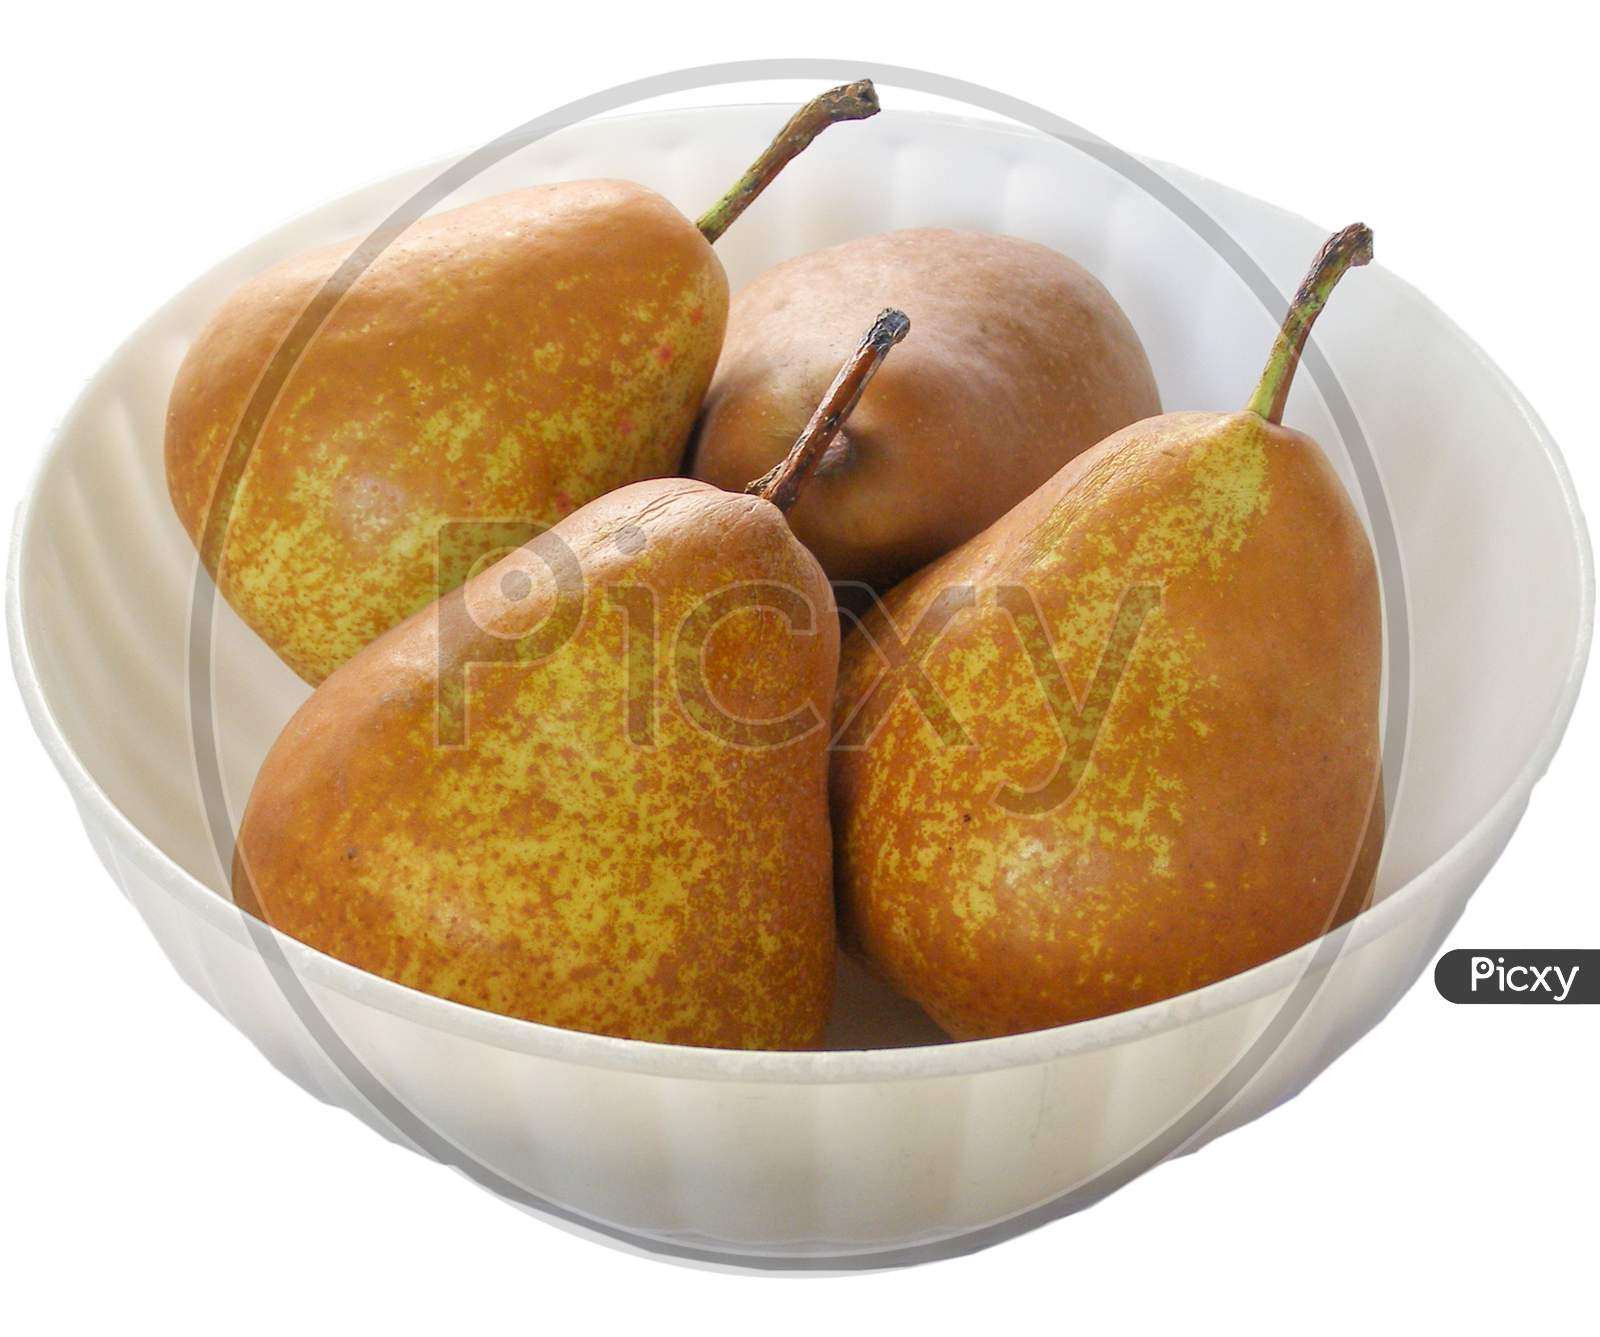 Pear Picture